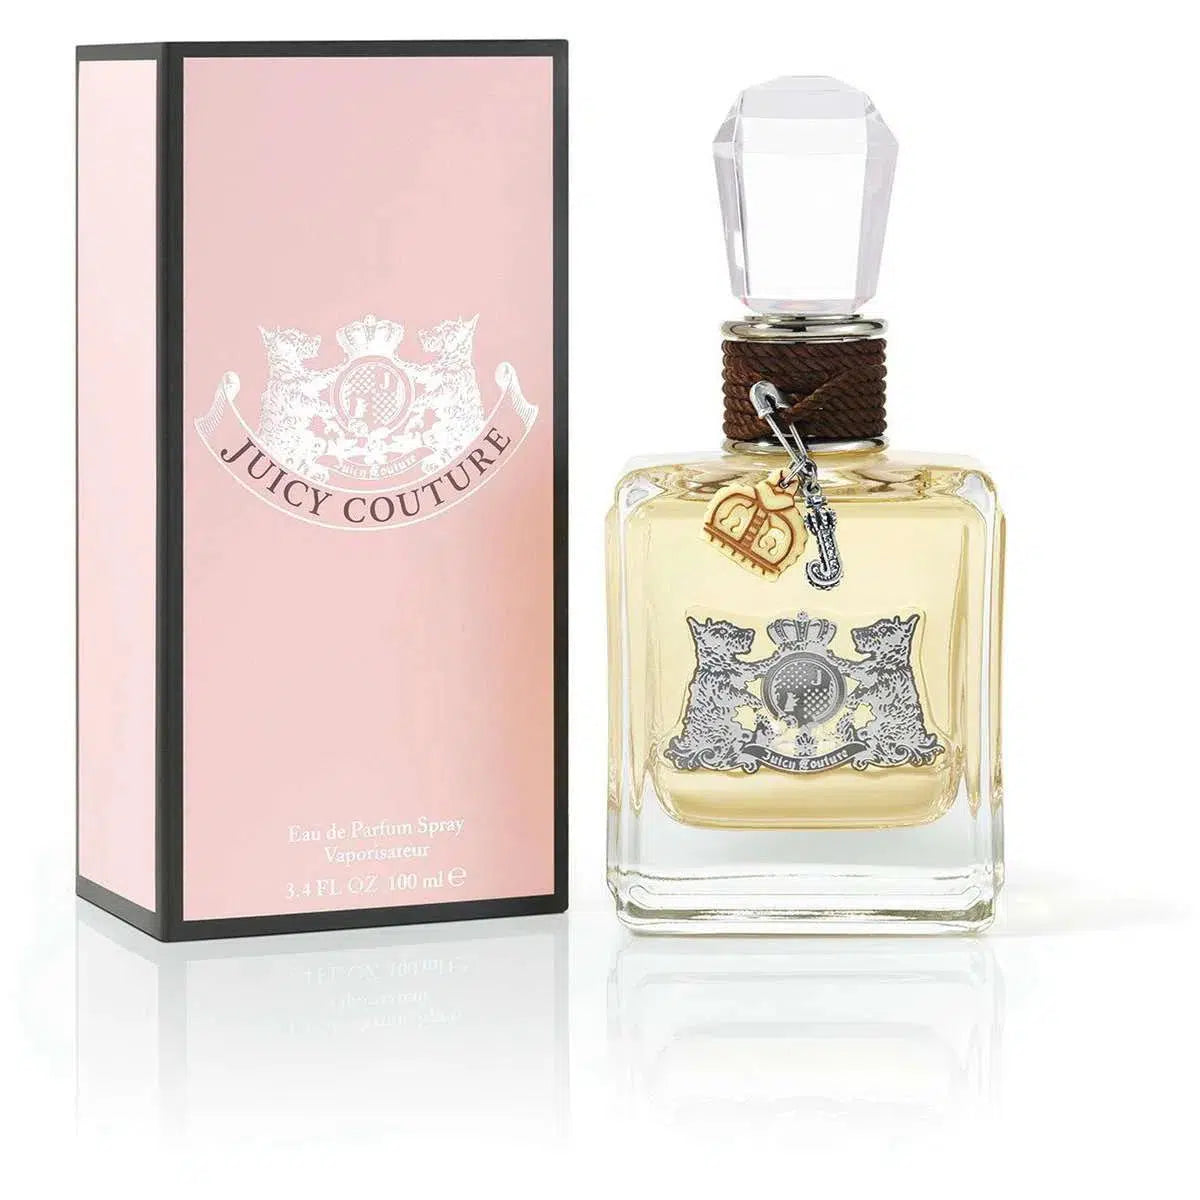 Juicy Couture 100ml - Perfume Philippines